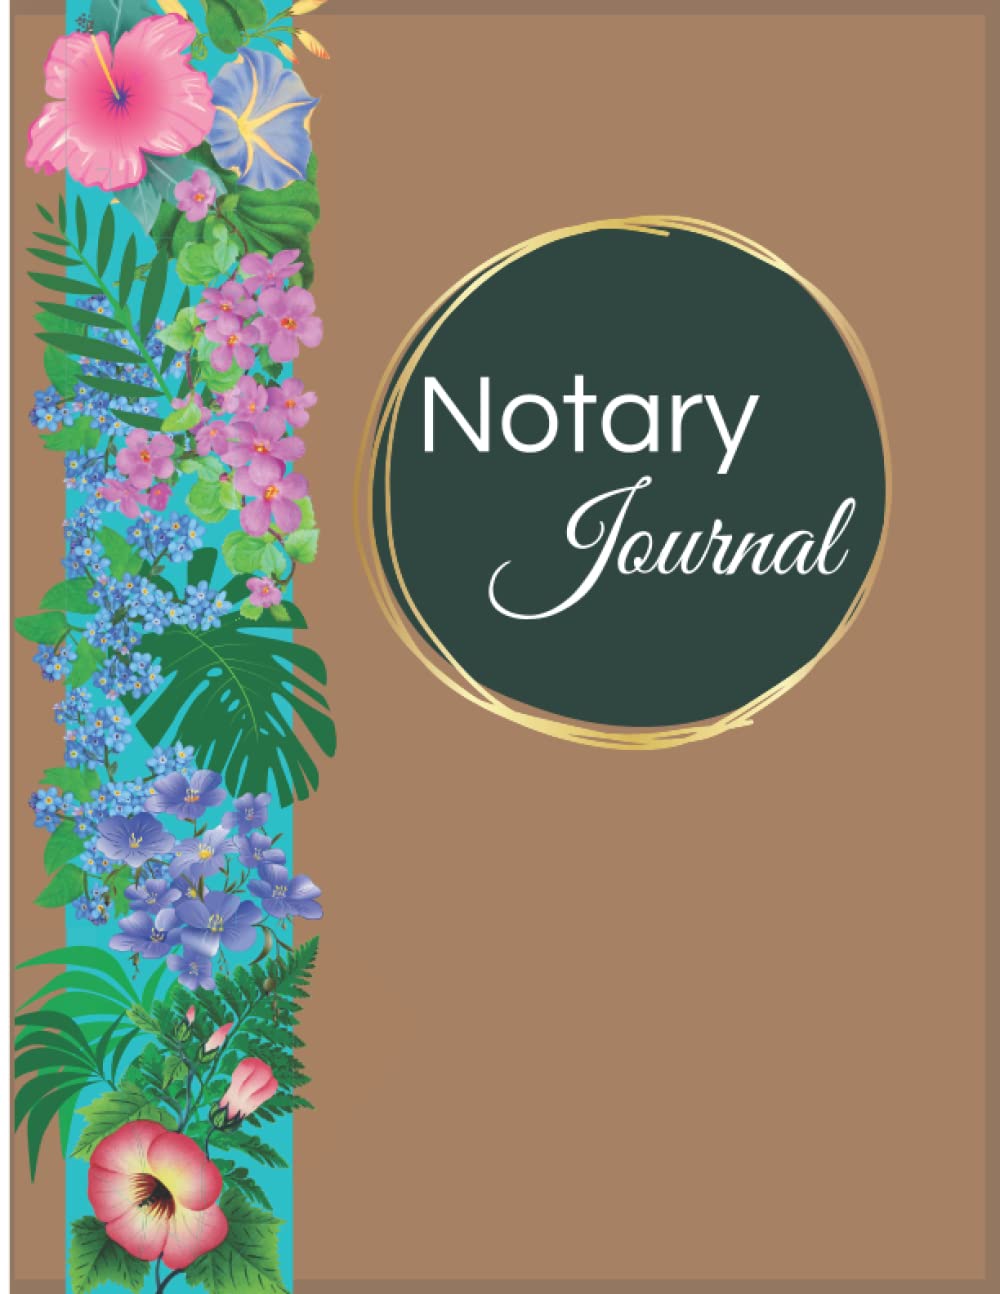 Notary Journal: A Notary Public Log Book to Record 200 Notarial Acts - Brown and Gold Cover